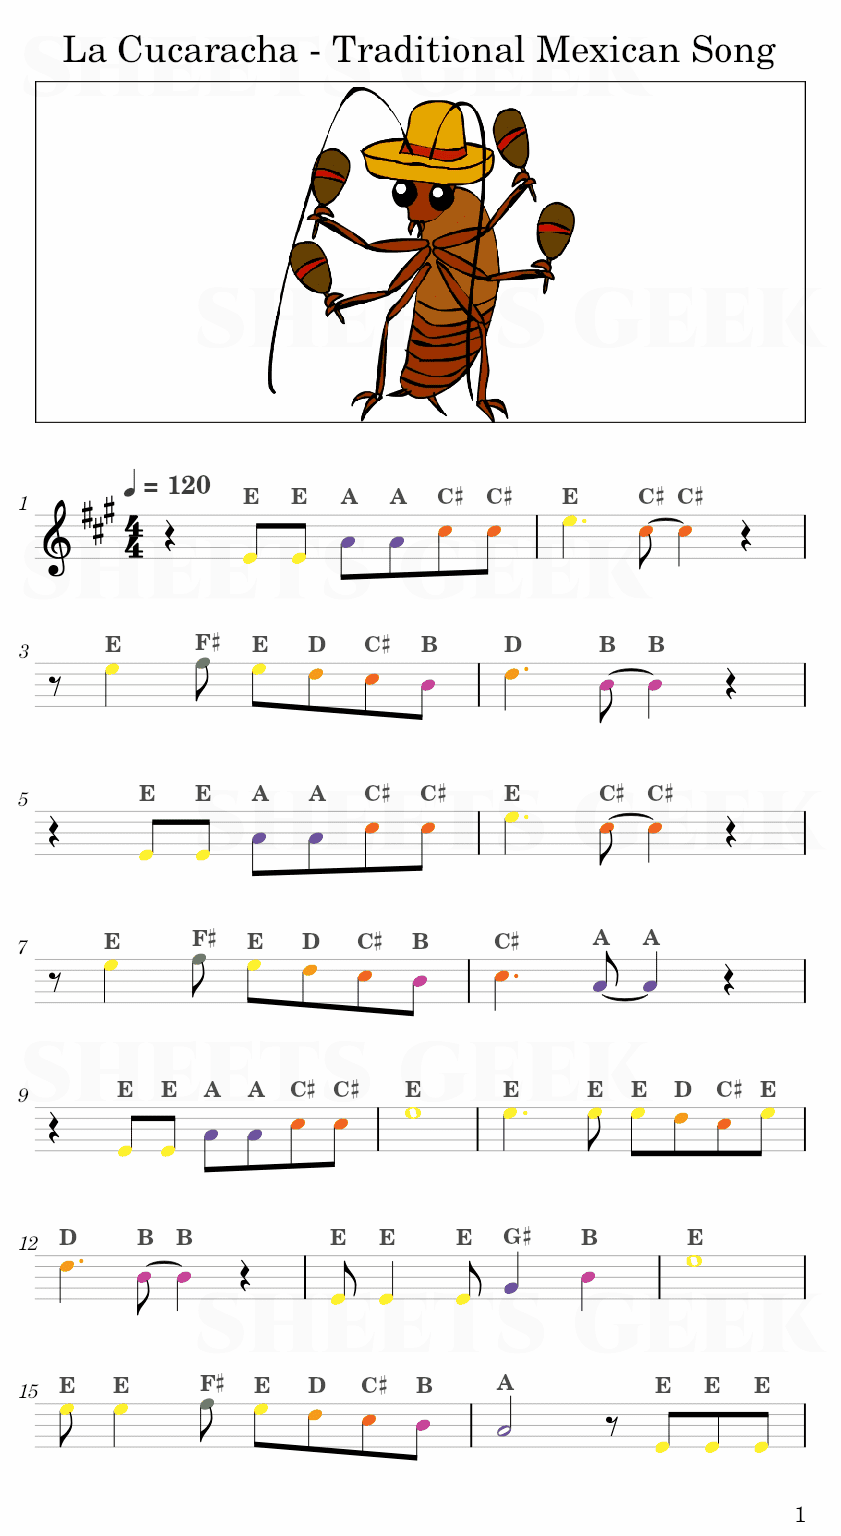 La Cucaracha - Traditional Mexican Song Easy Sheet Music Free for piano, keyboard, flute, violin, sax, cello page 1